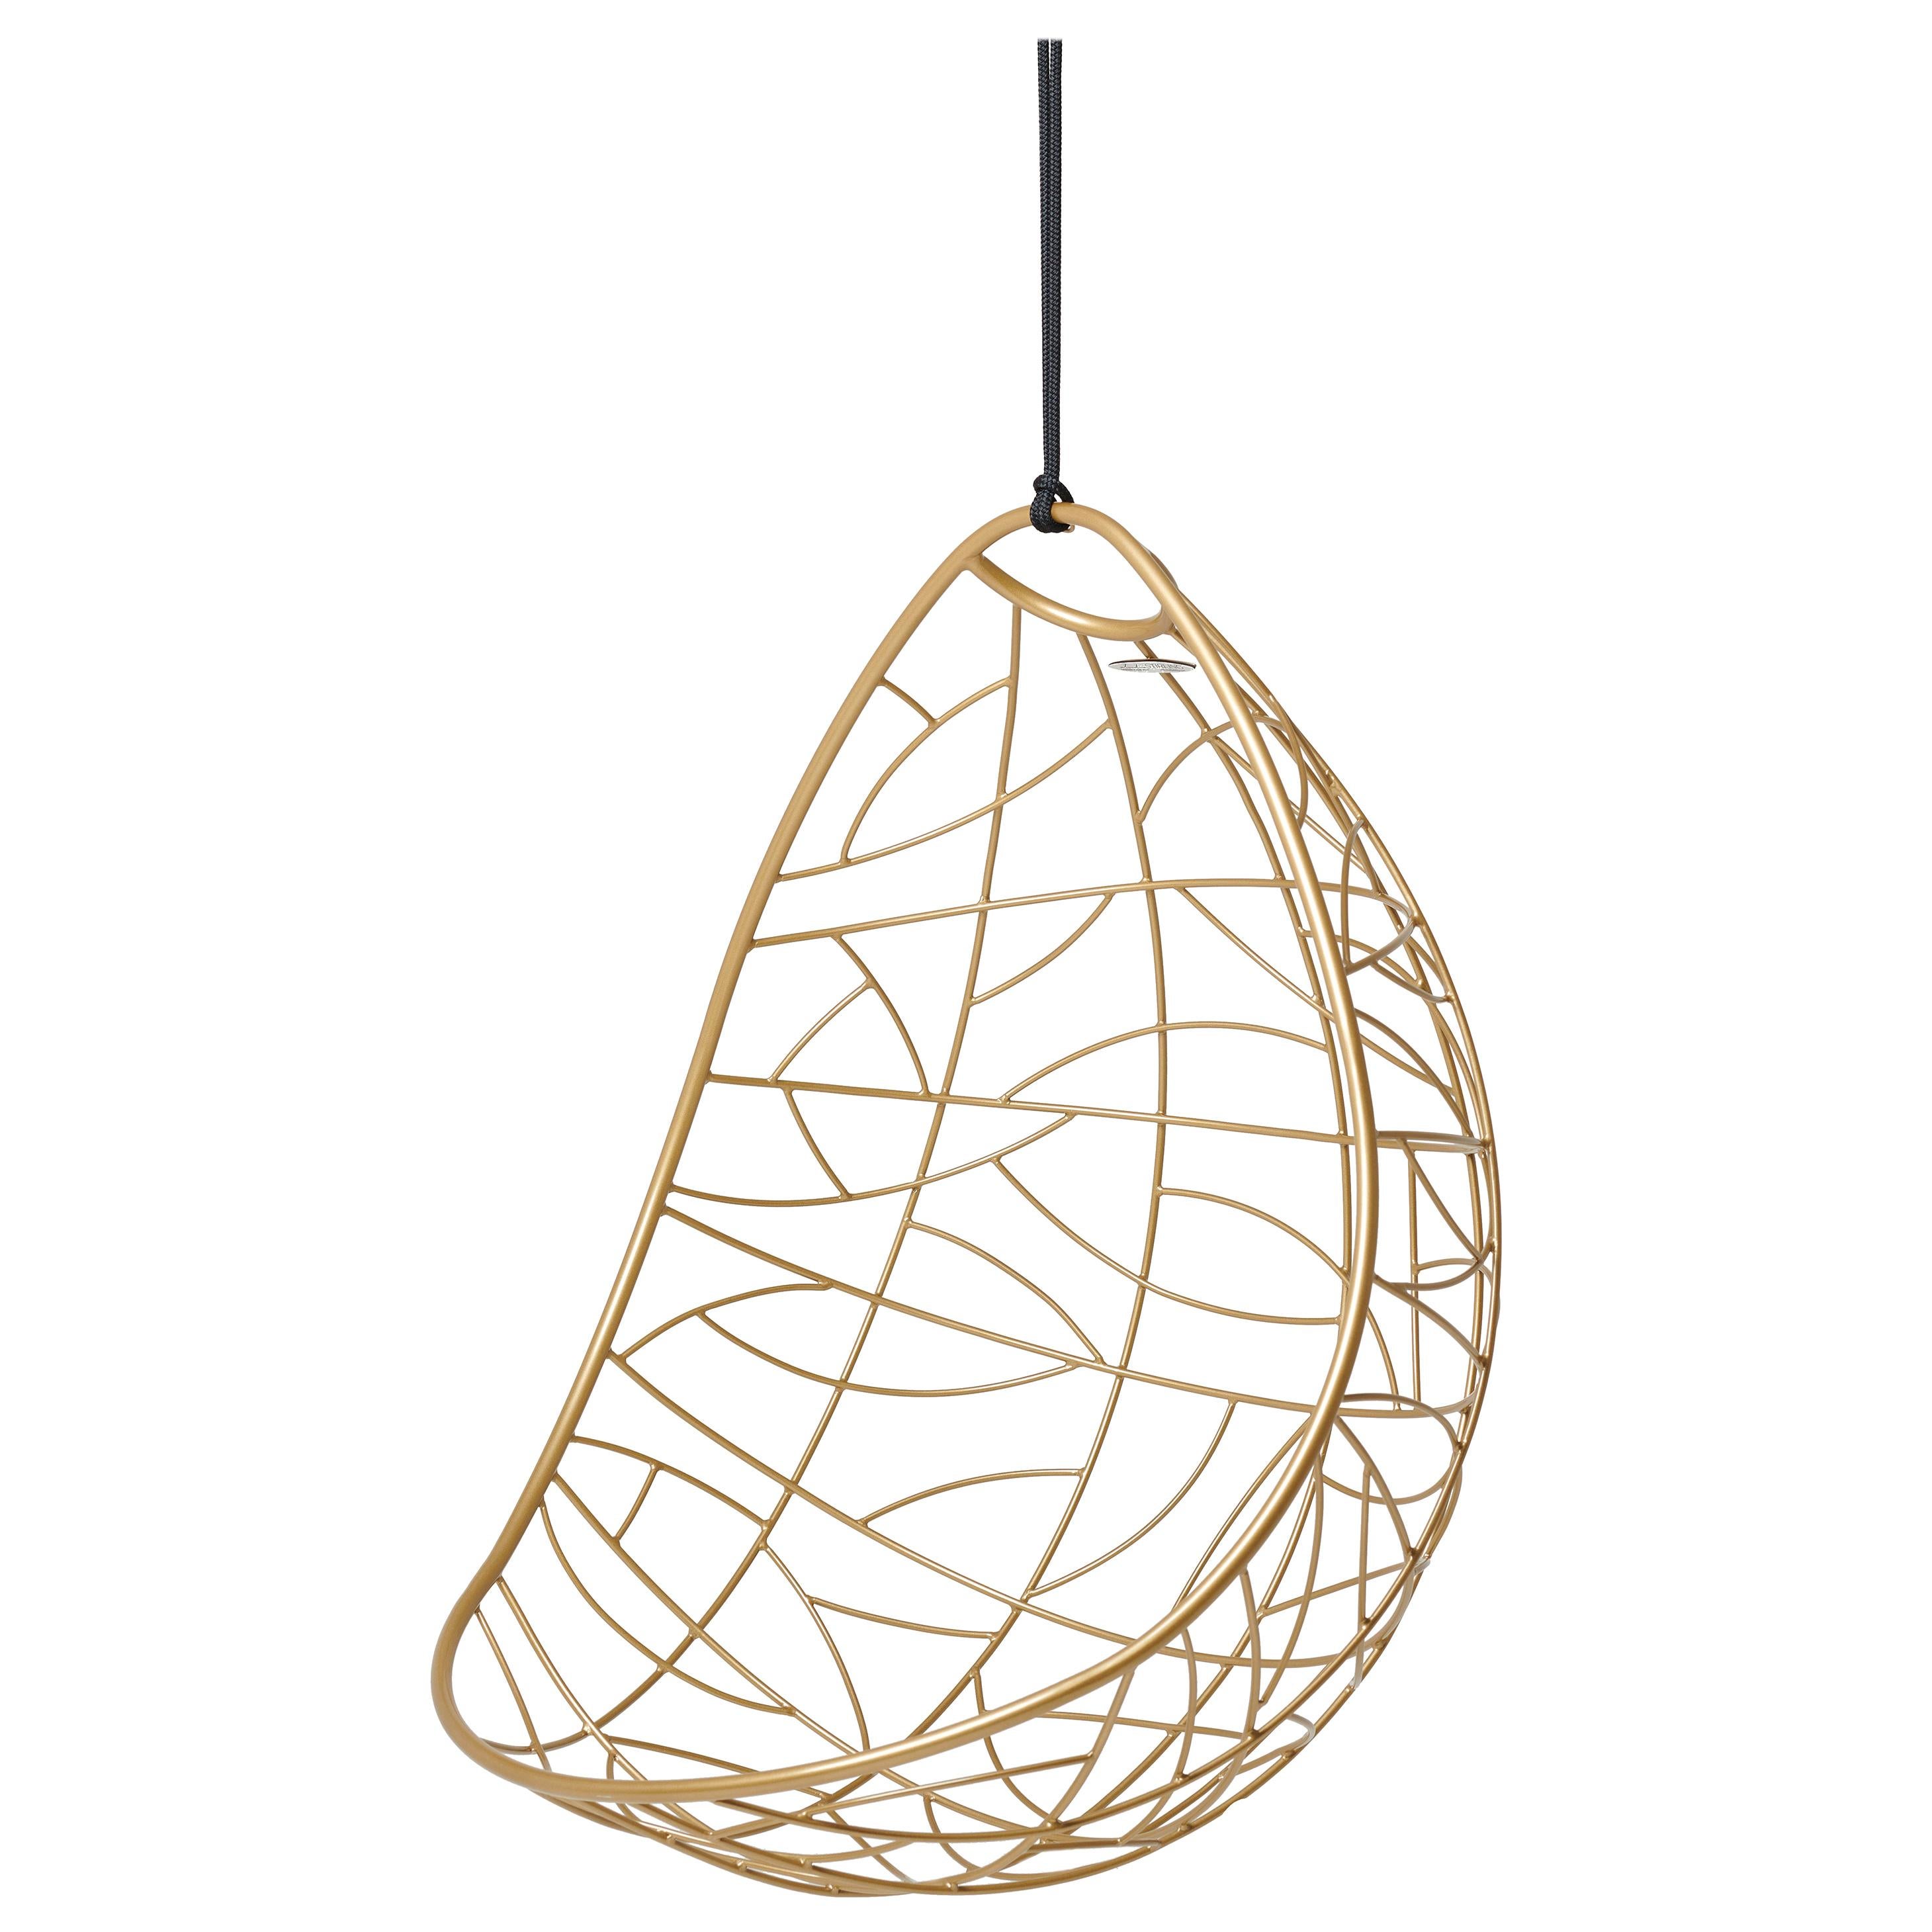 Nest Egg Hanging Swing Chair Steel Modern In/ Outdoor 21st Century Gold Twig